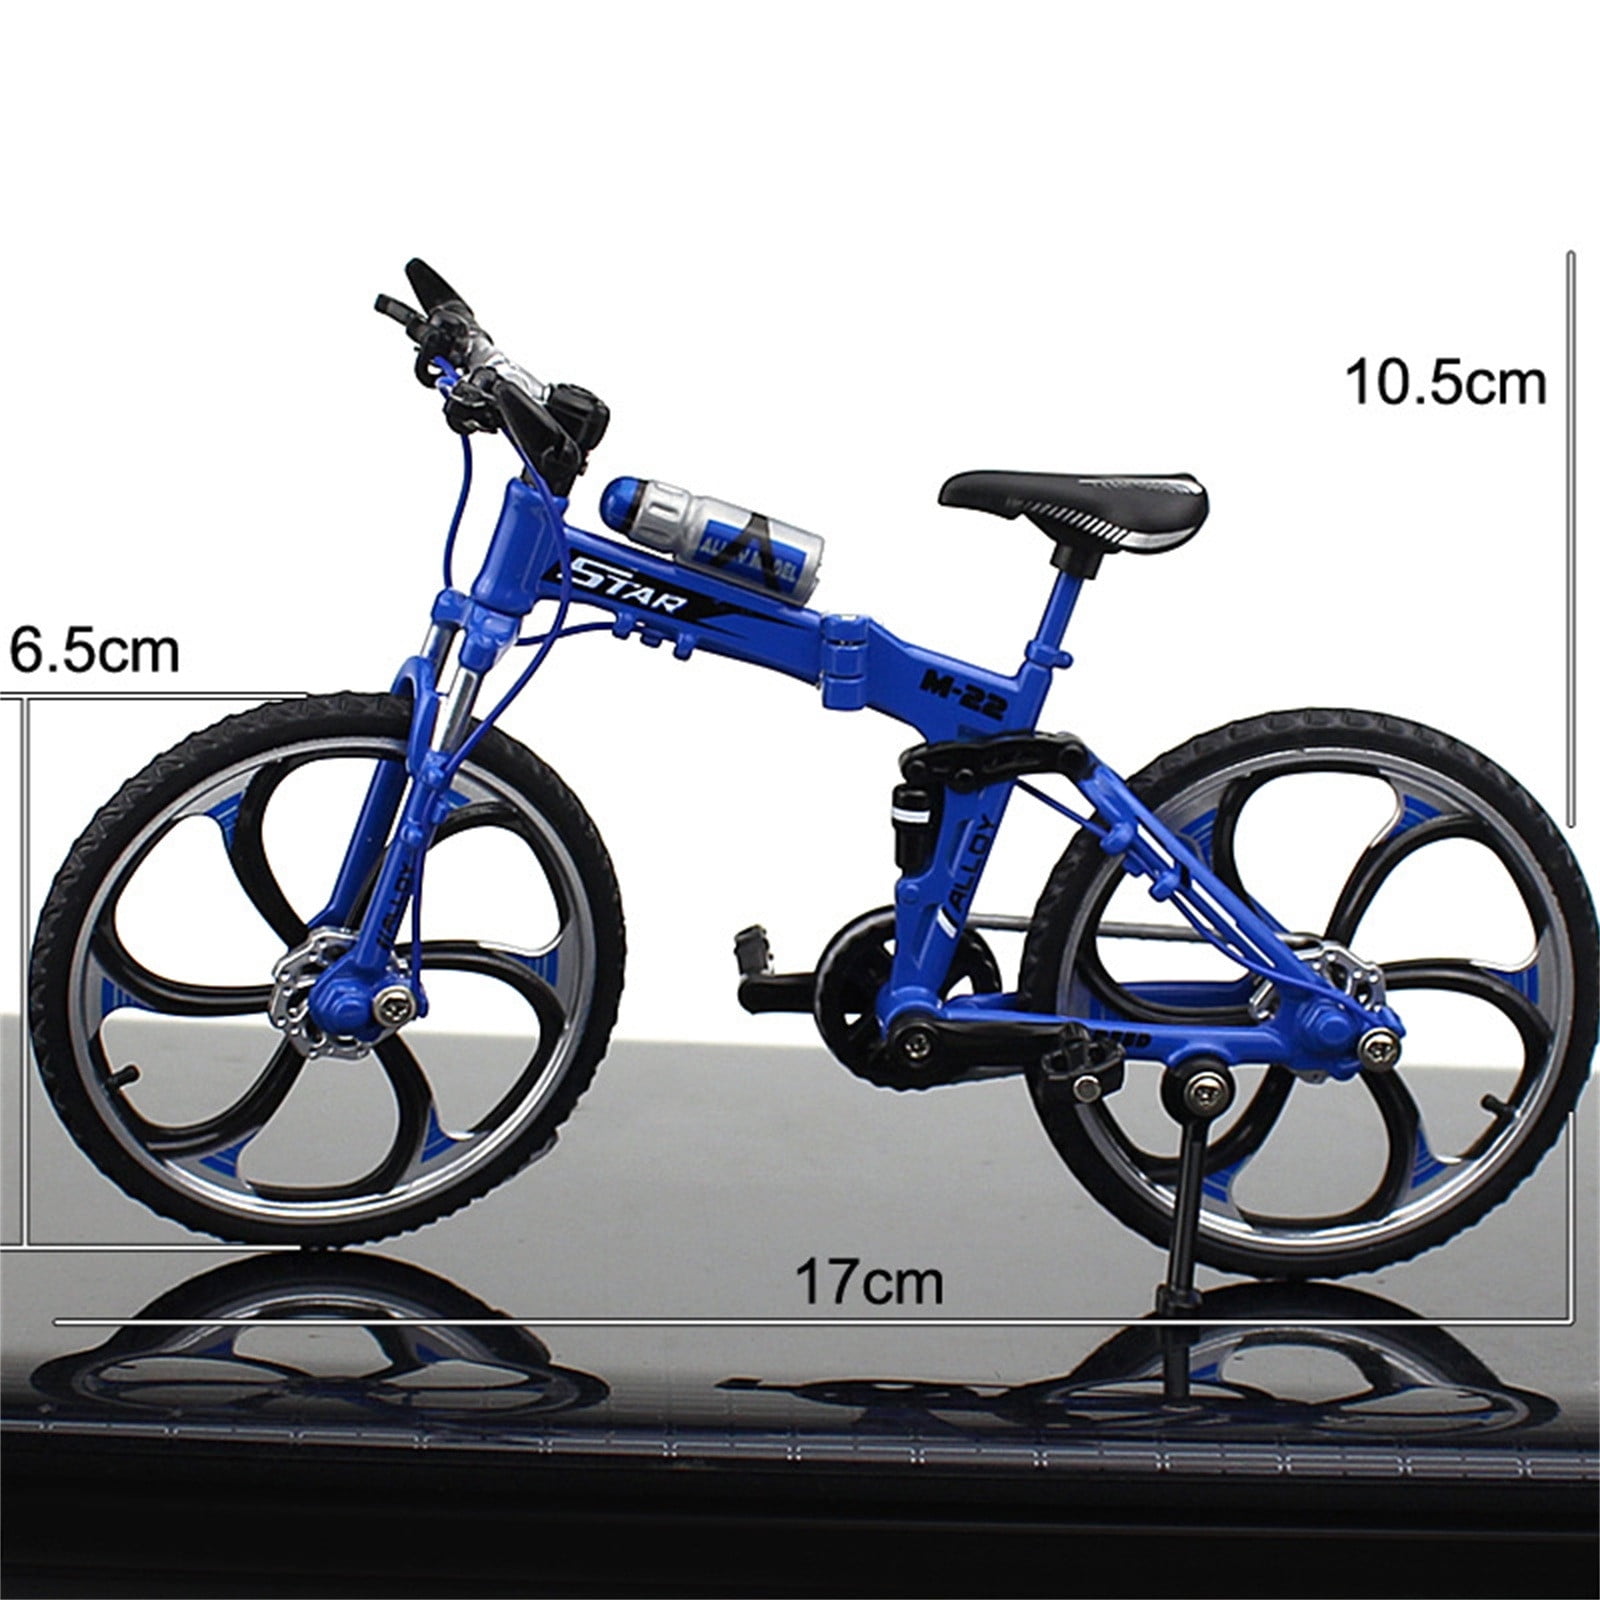 CHGBMOK Toy Cars Clearance Mini Alloy Racing Bicycle Toy Mini Bike for Vehicle Home Decoration Up to 50% off Toys - Walmart.com